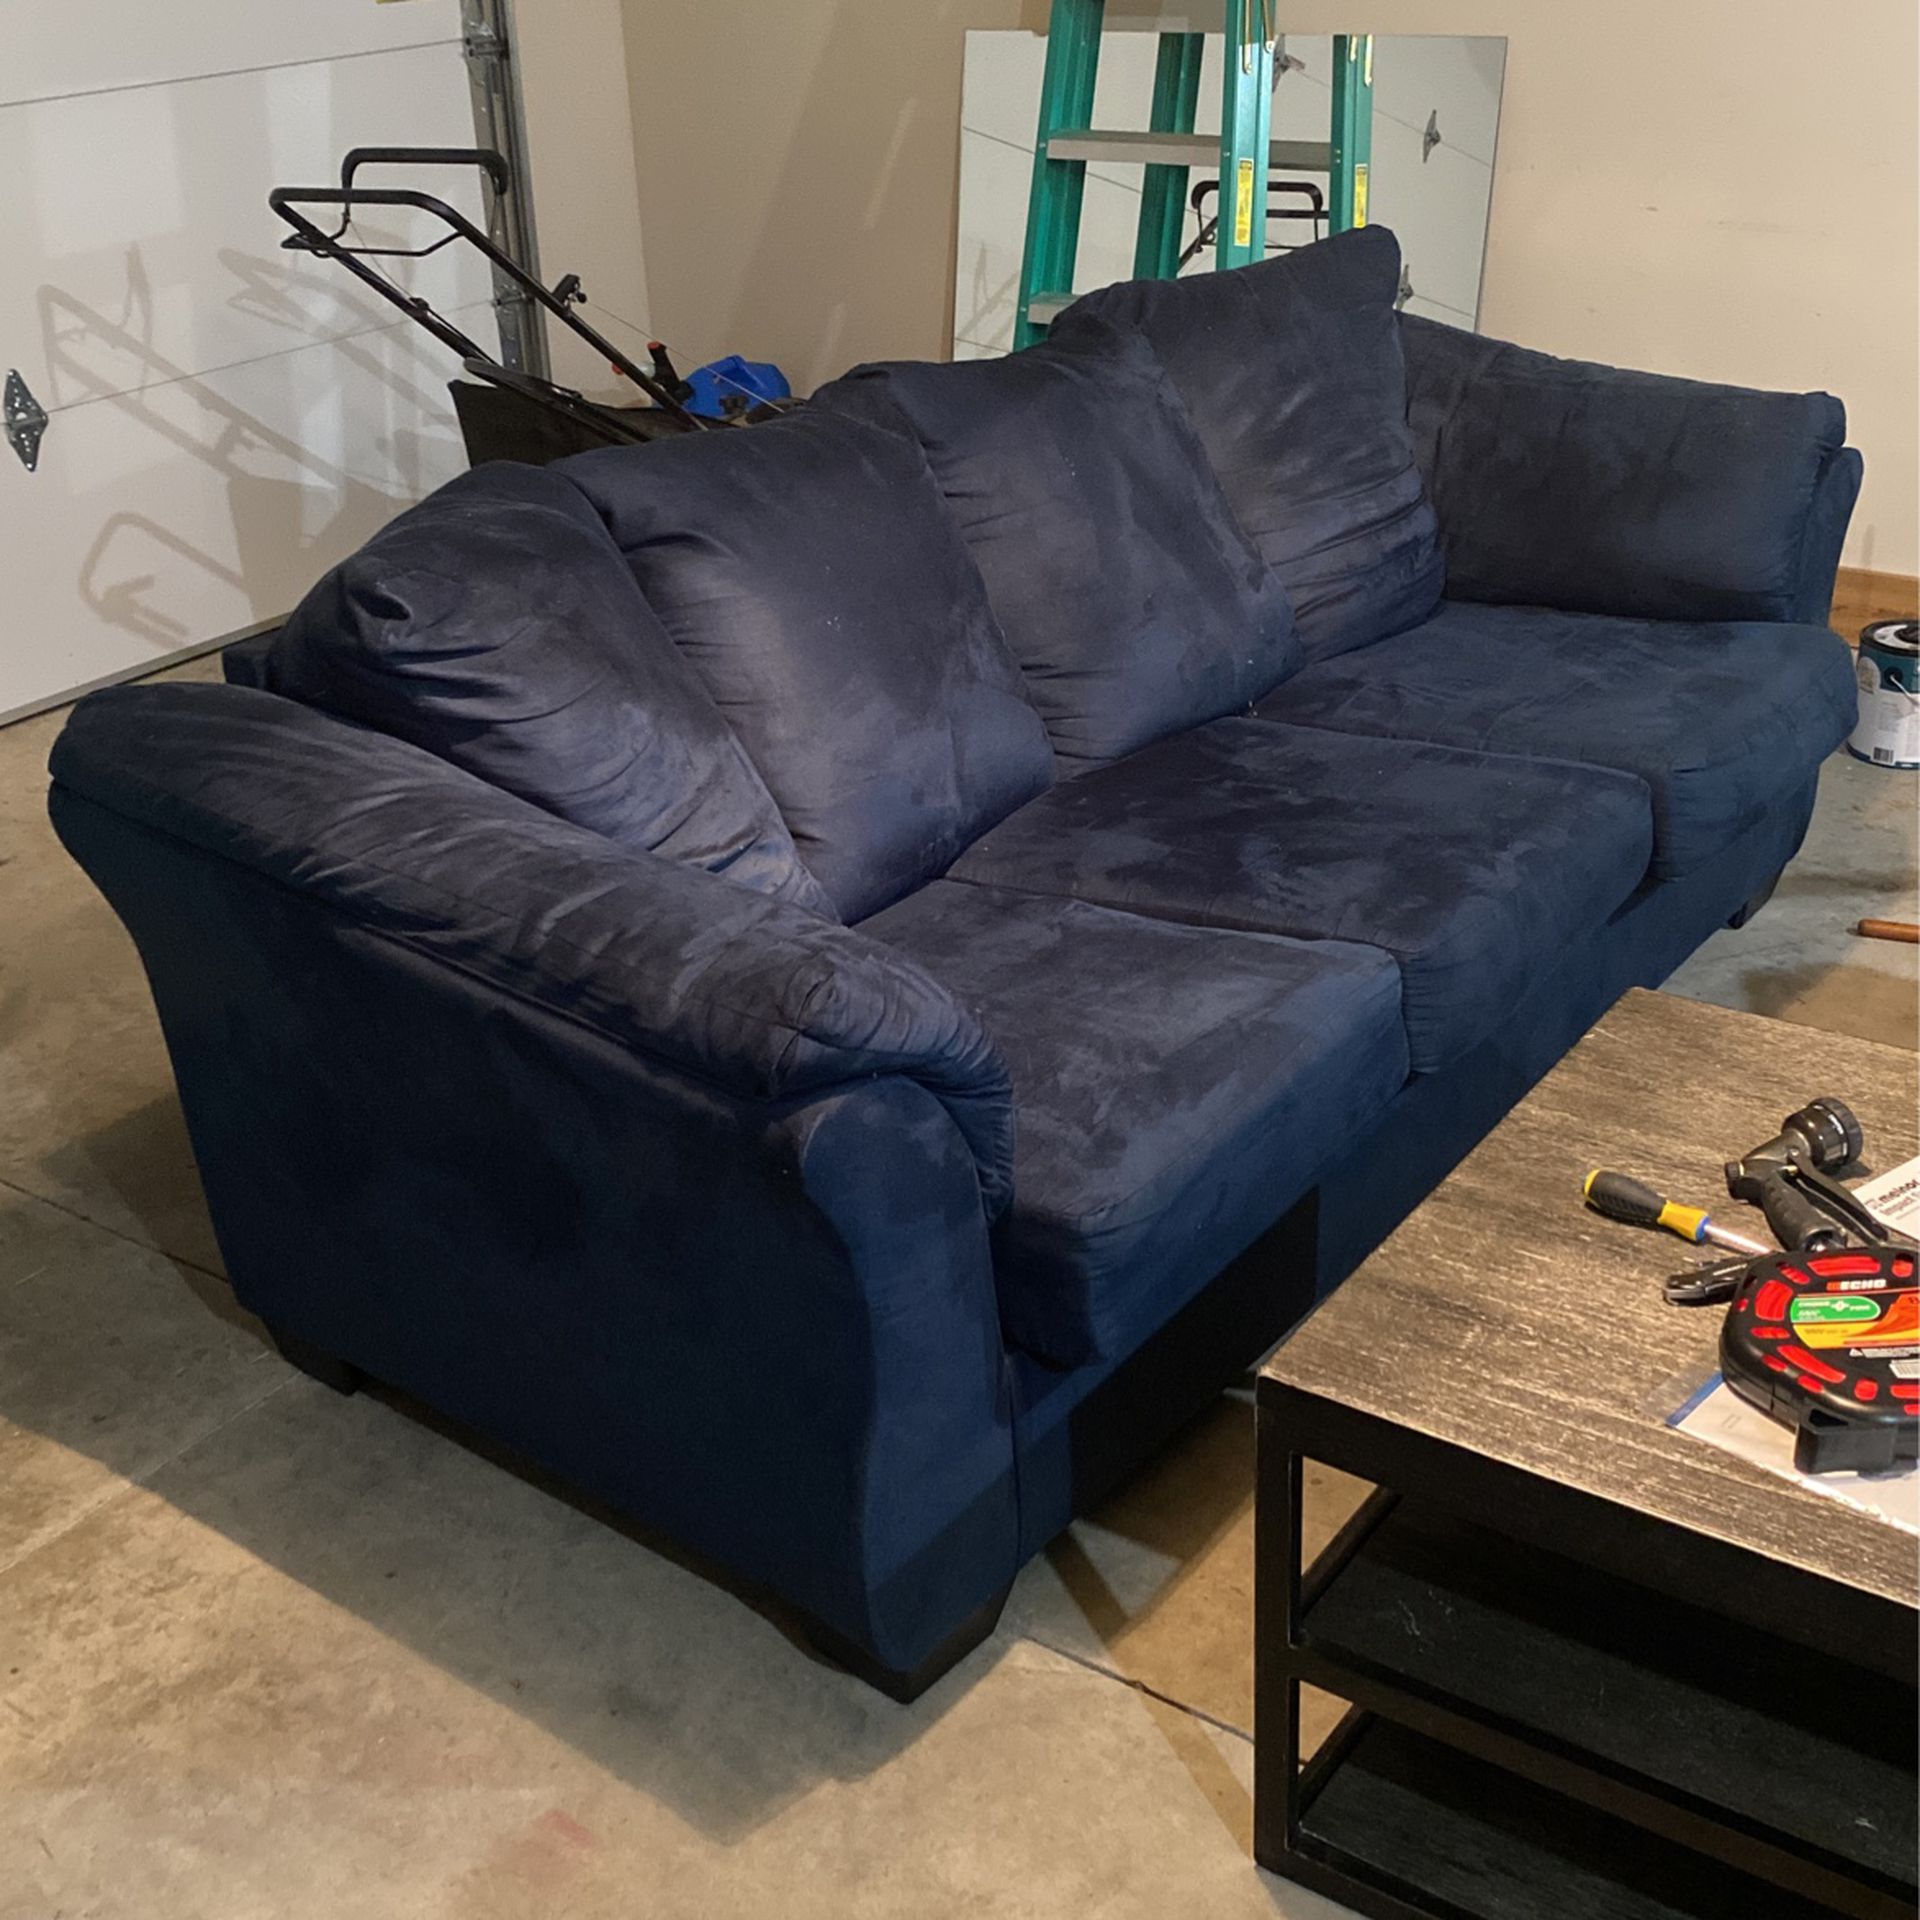 Free Couch And Lounge Chair 